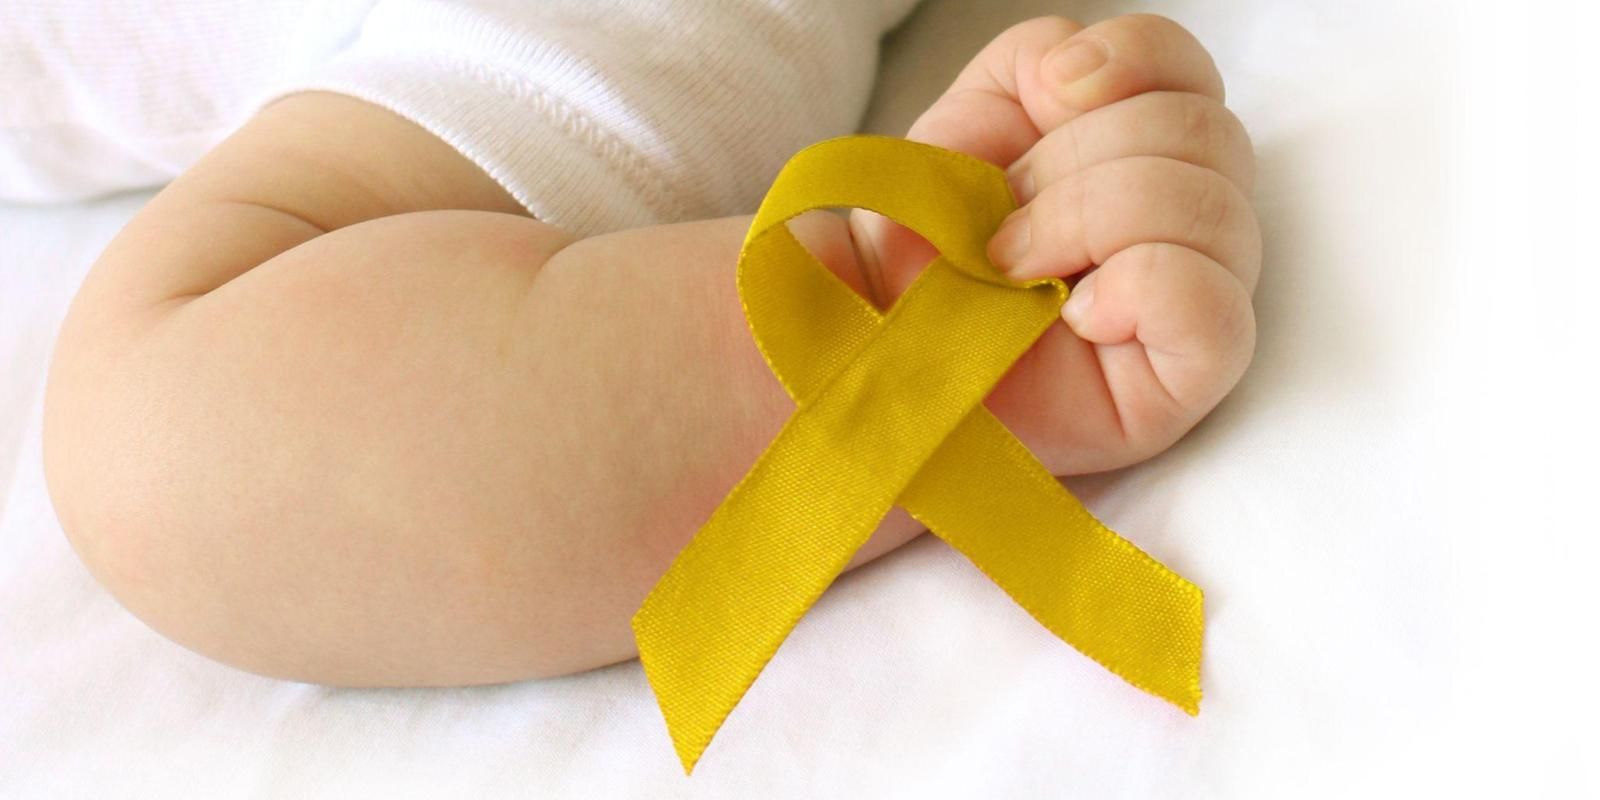 Understanding childhood cancers and their treatment